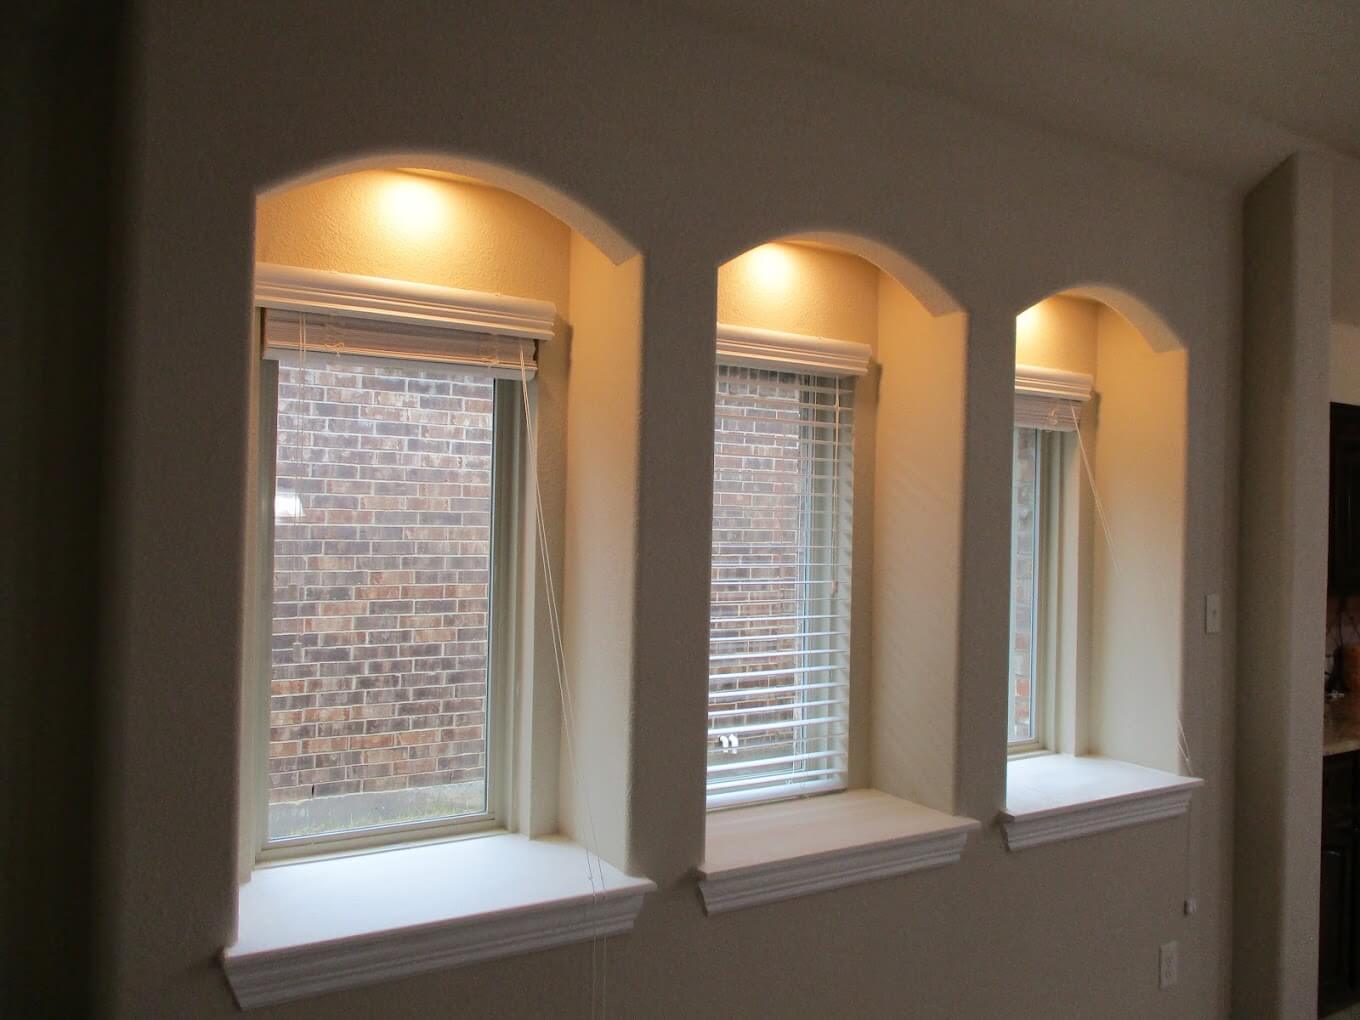 Electrical Services window lights